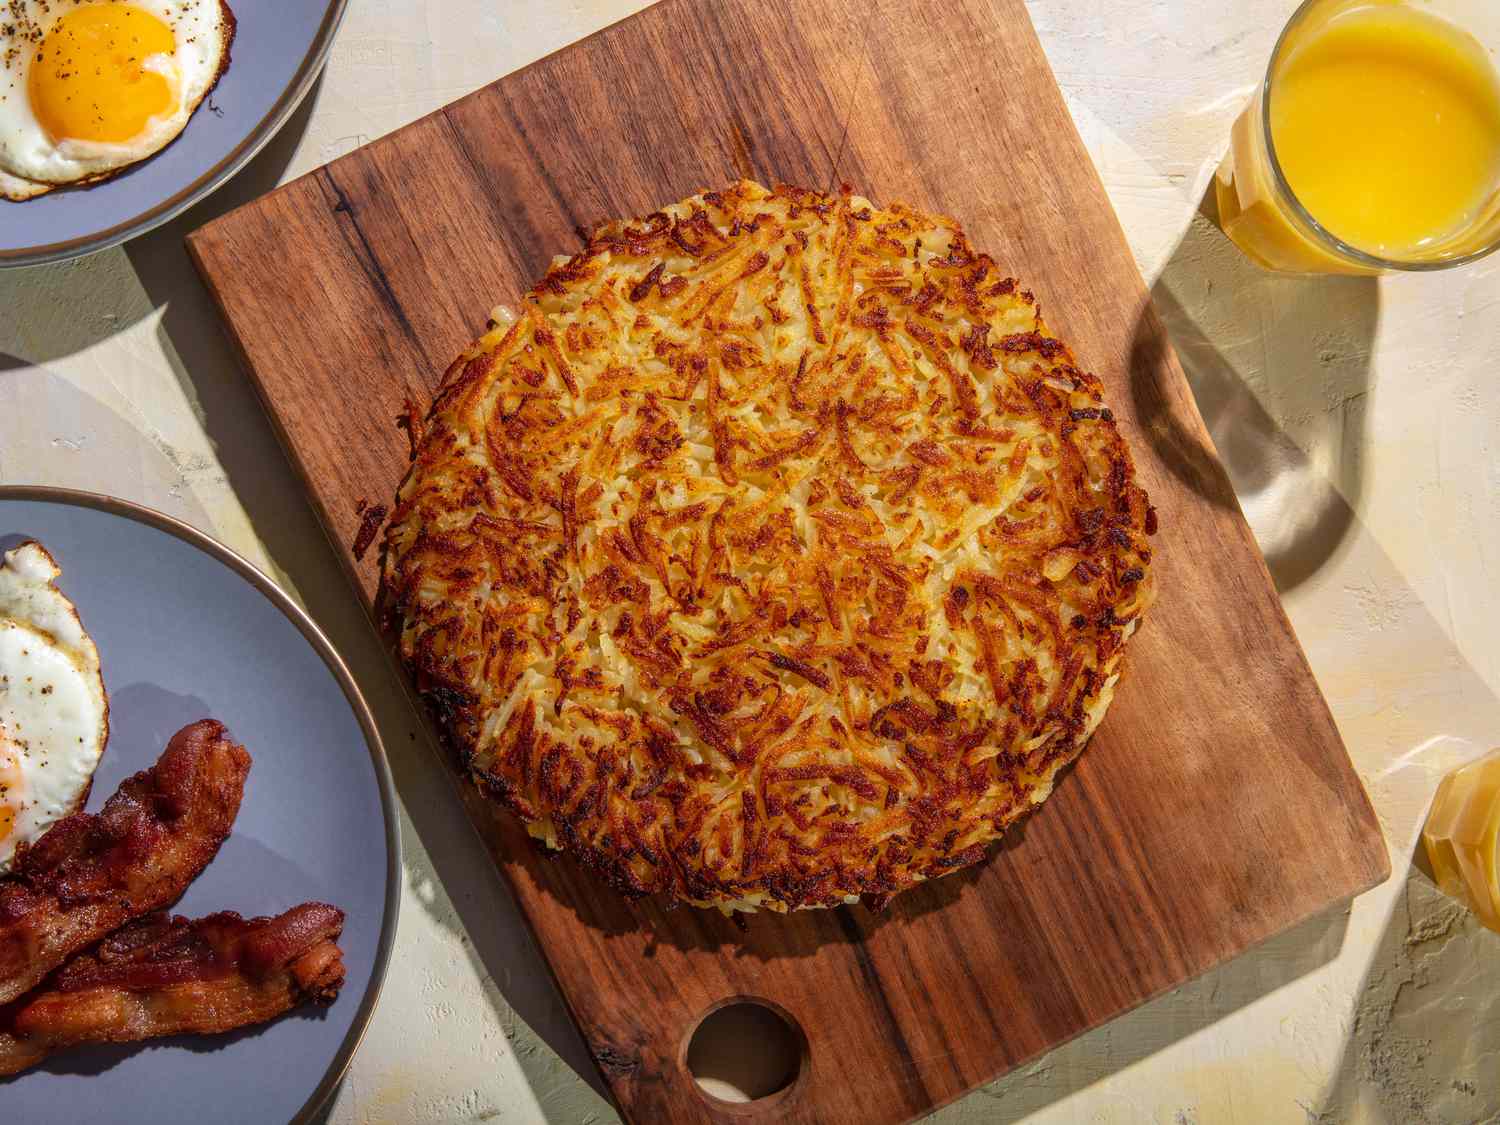 A deeply browned rÃ¶sti sits on a wooden cutting board, with plates of fried eggs and bacon, and glasses of orange juice around it on the table.